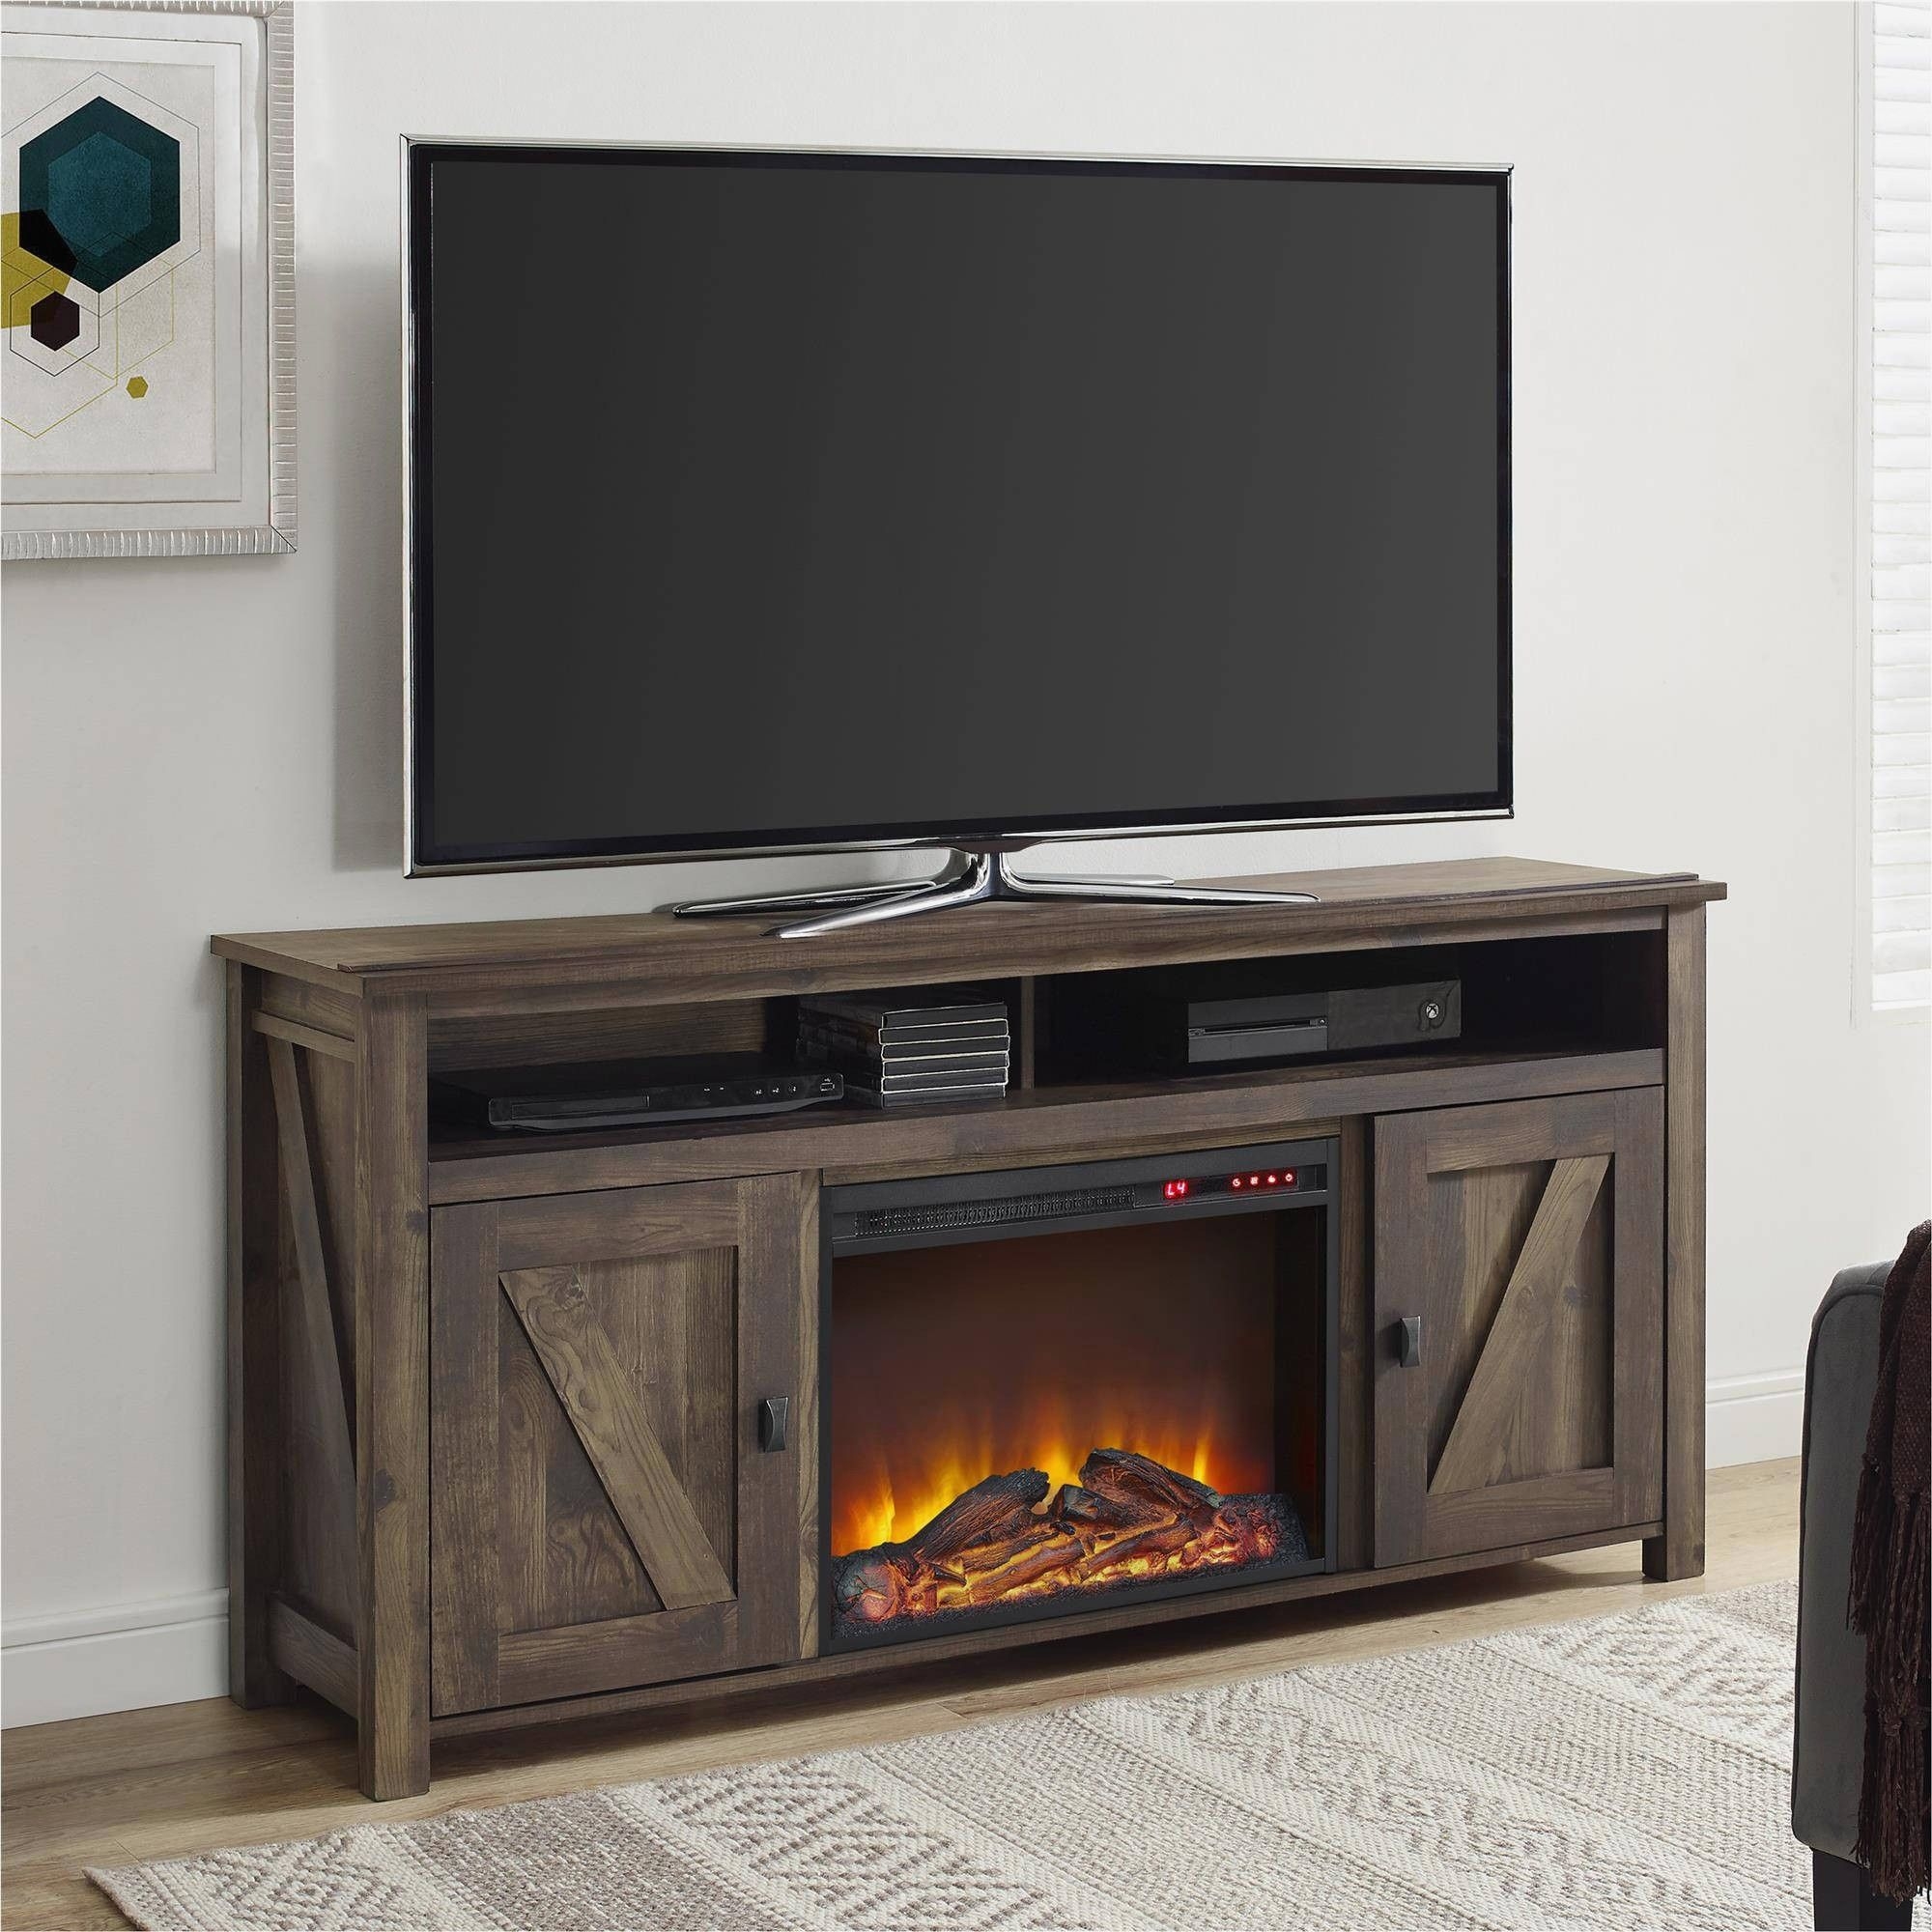 Whittier TV Stand for TVs up to 78" with Electric Fireplace Included